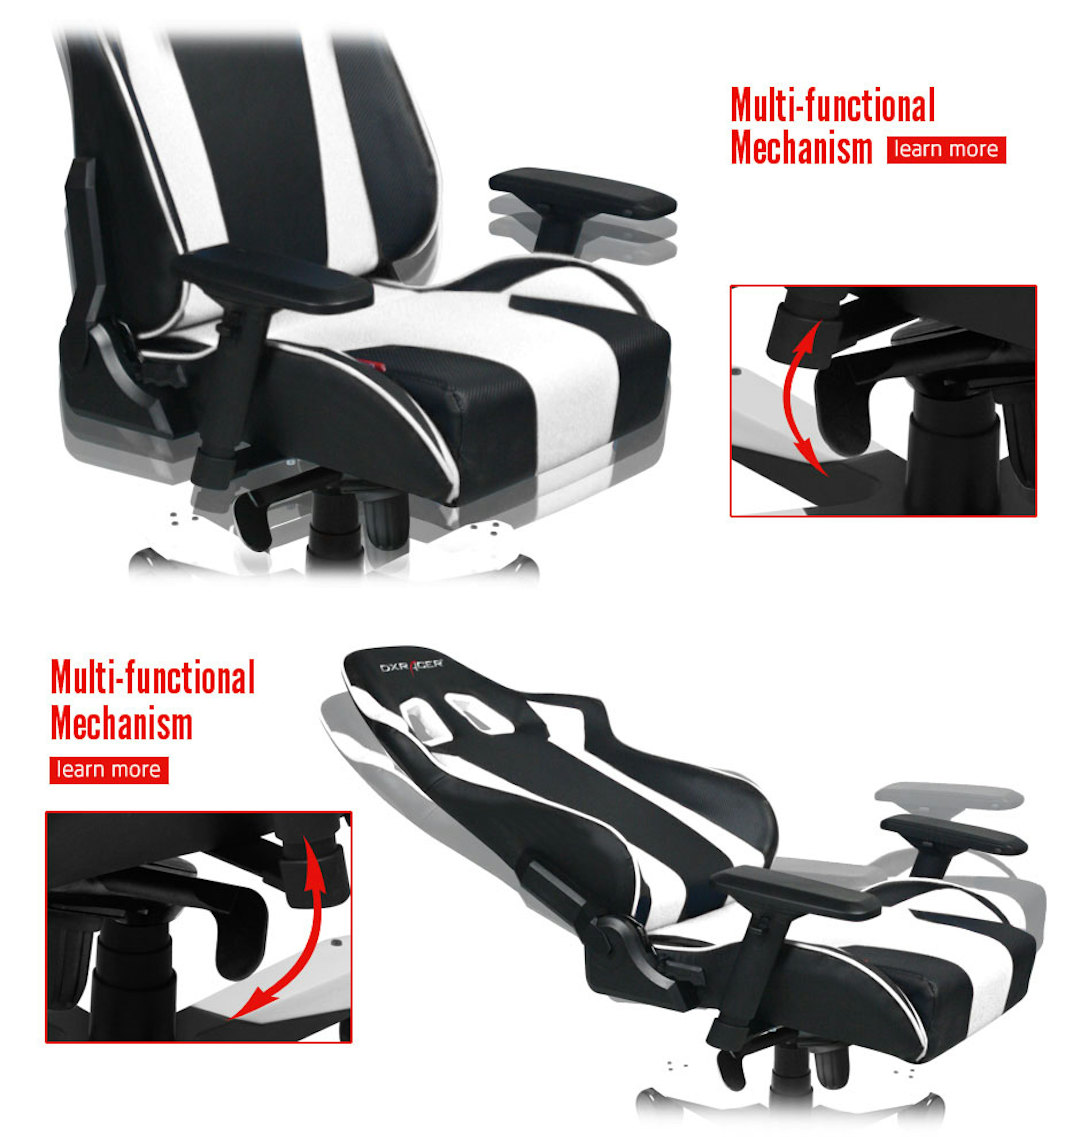 DXRacer King Series PC Gaming Chair - OH/KF06